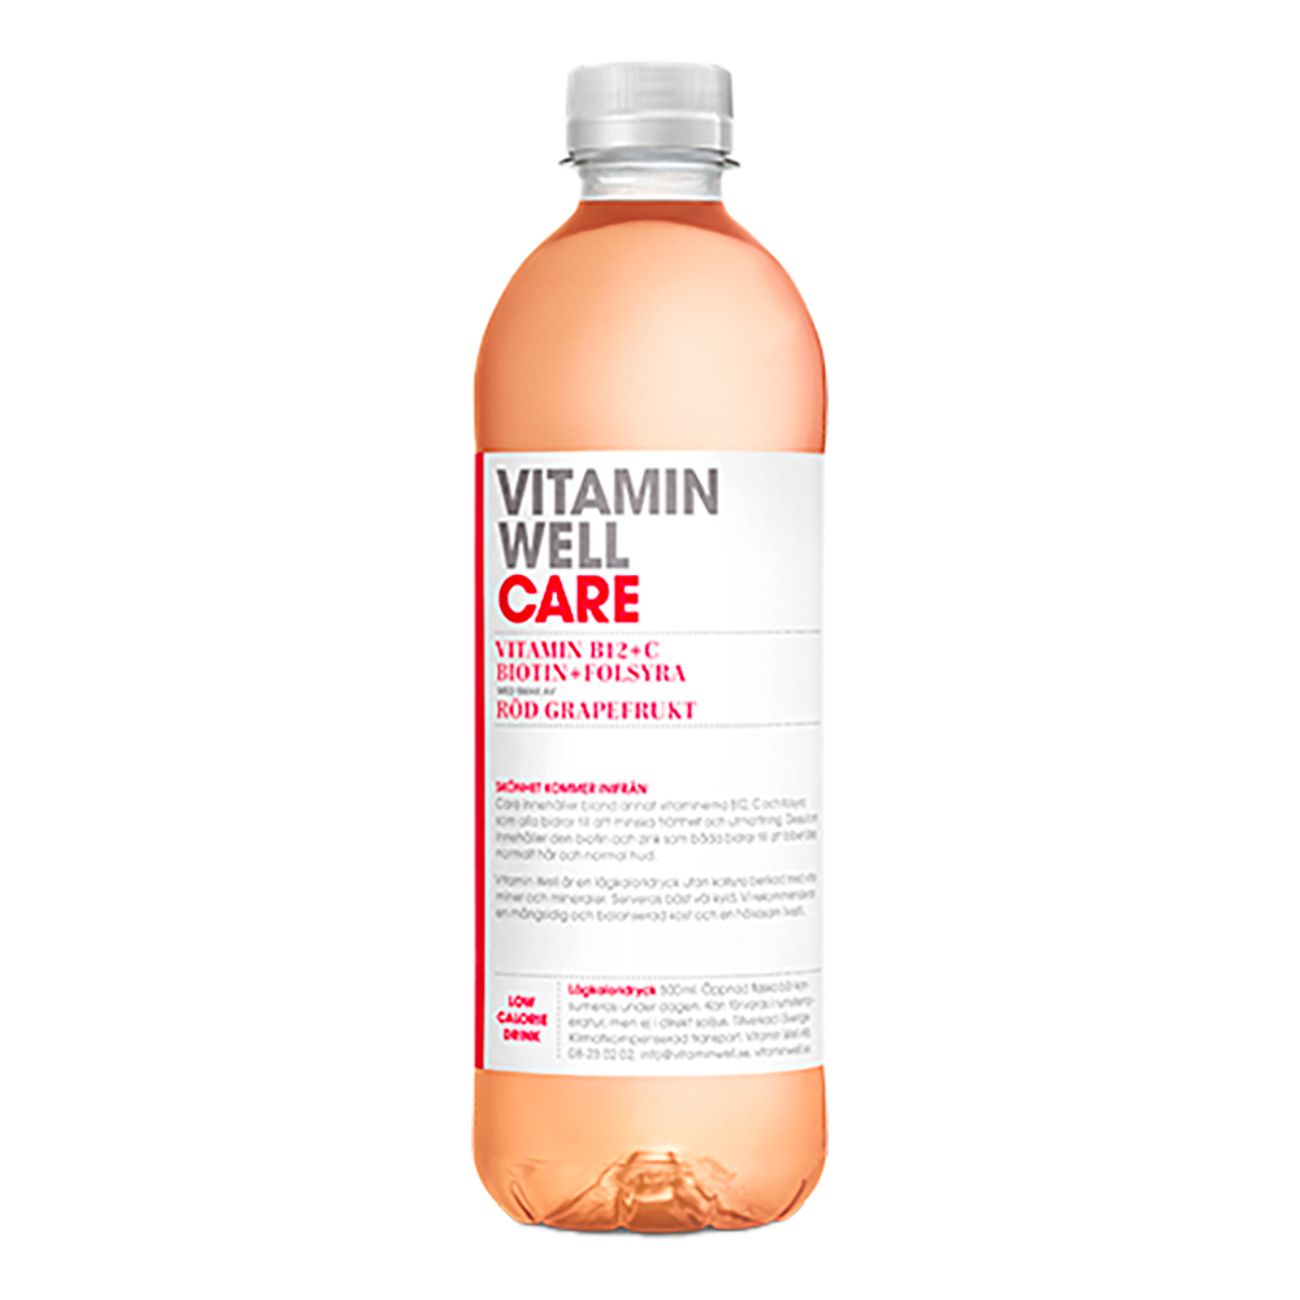 vitamin-well-care-82470-1